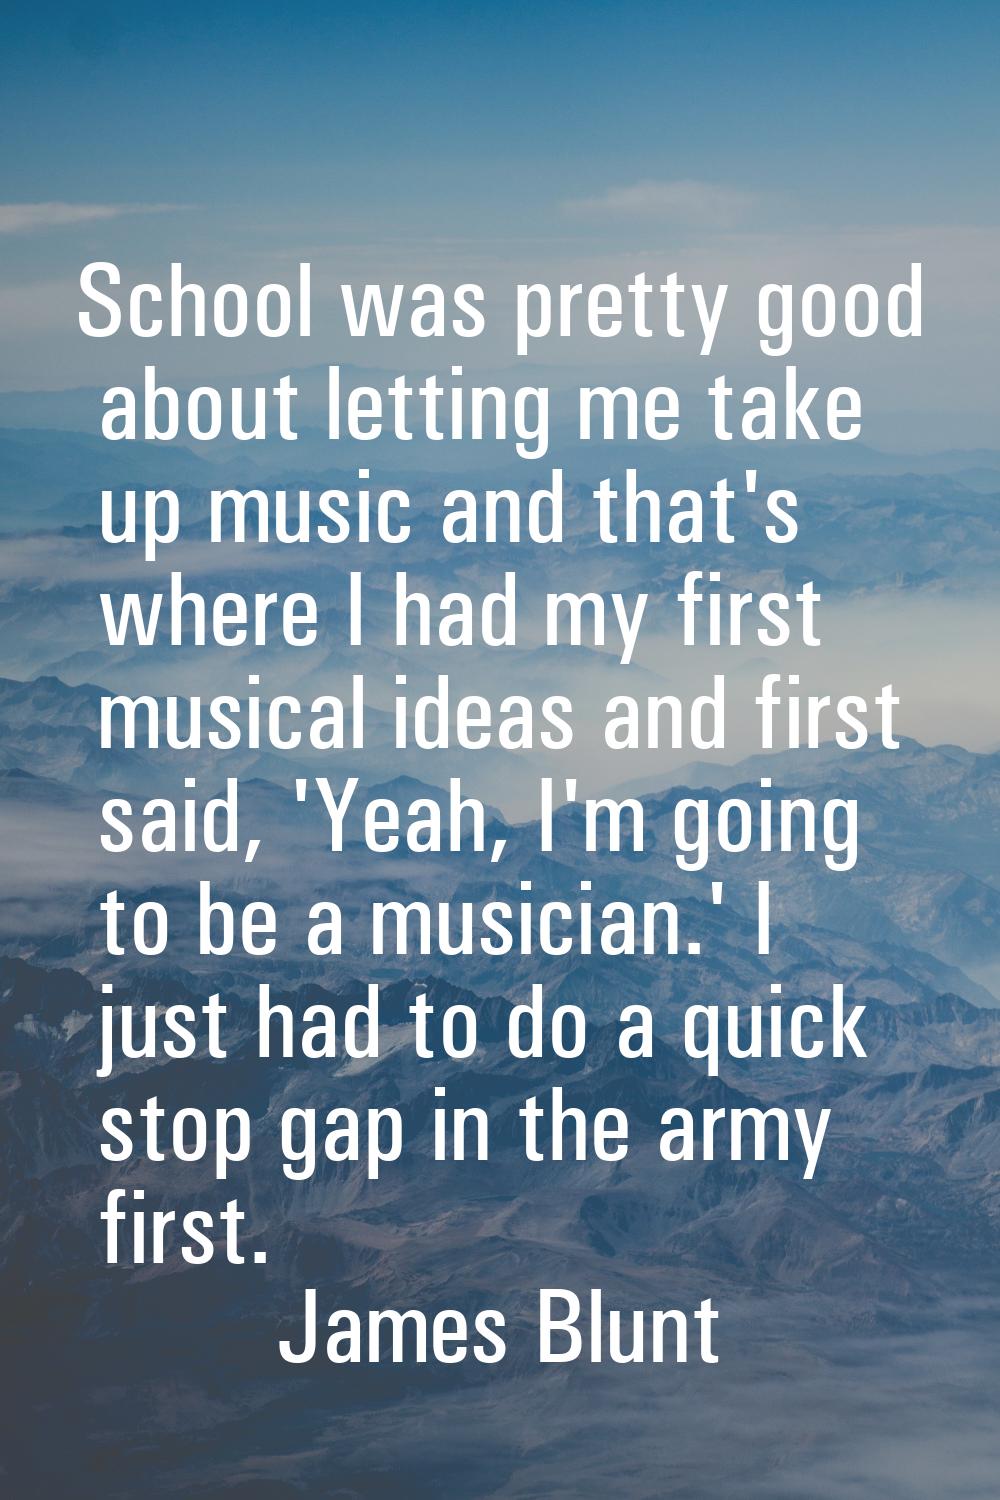 School was pretty good about letting me take up music and that's where I had my first musical ideas